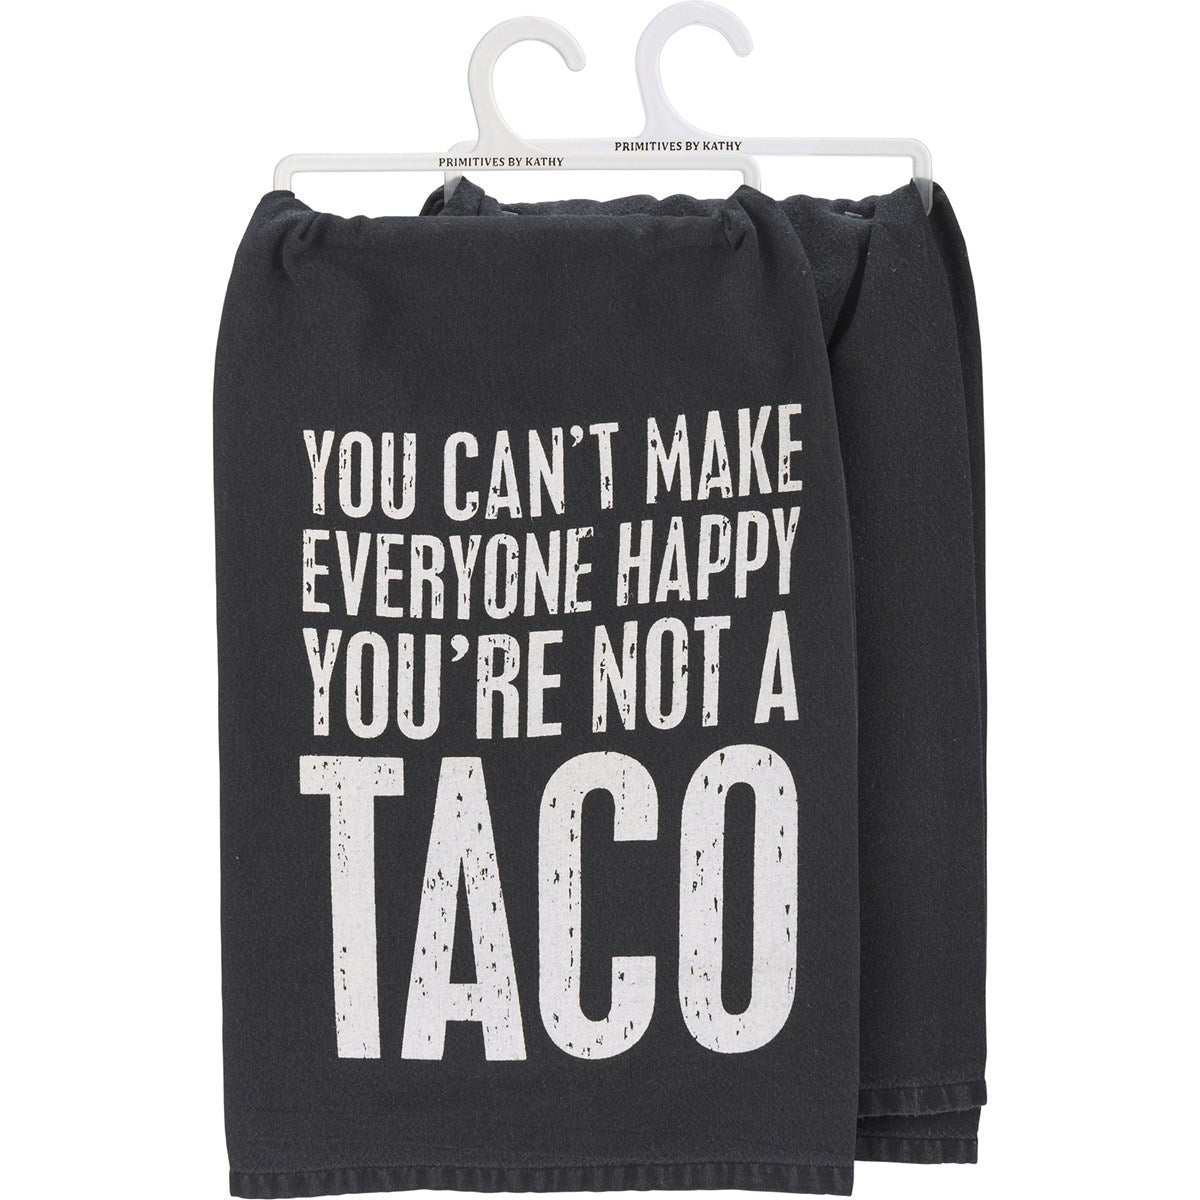 "YOU CAN'T MAKE EVERYONE HAPPY YOU'RE NOT A TACO" DISH TOWEL